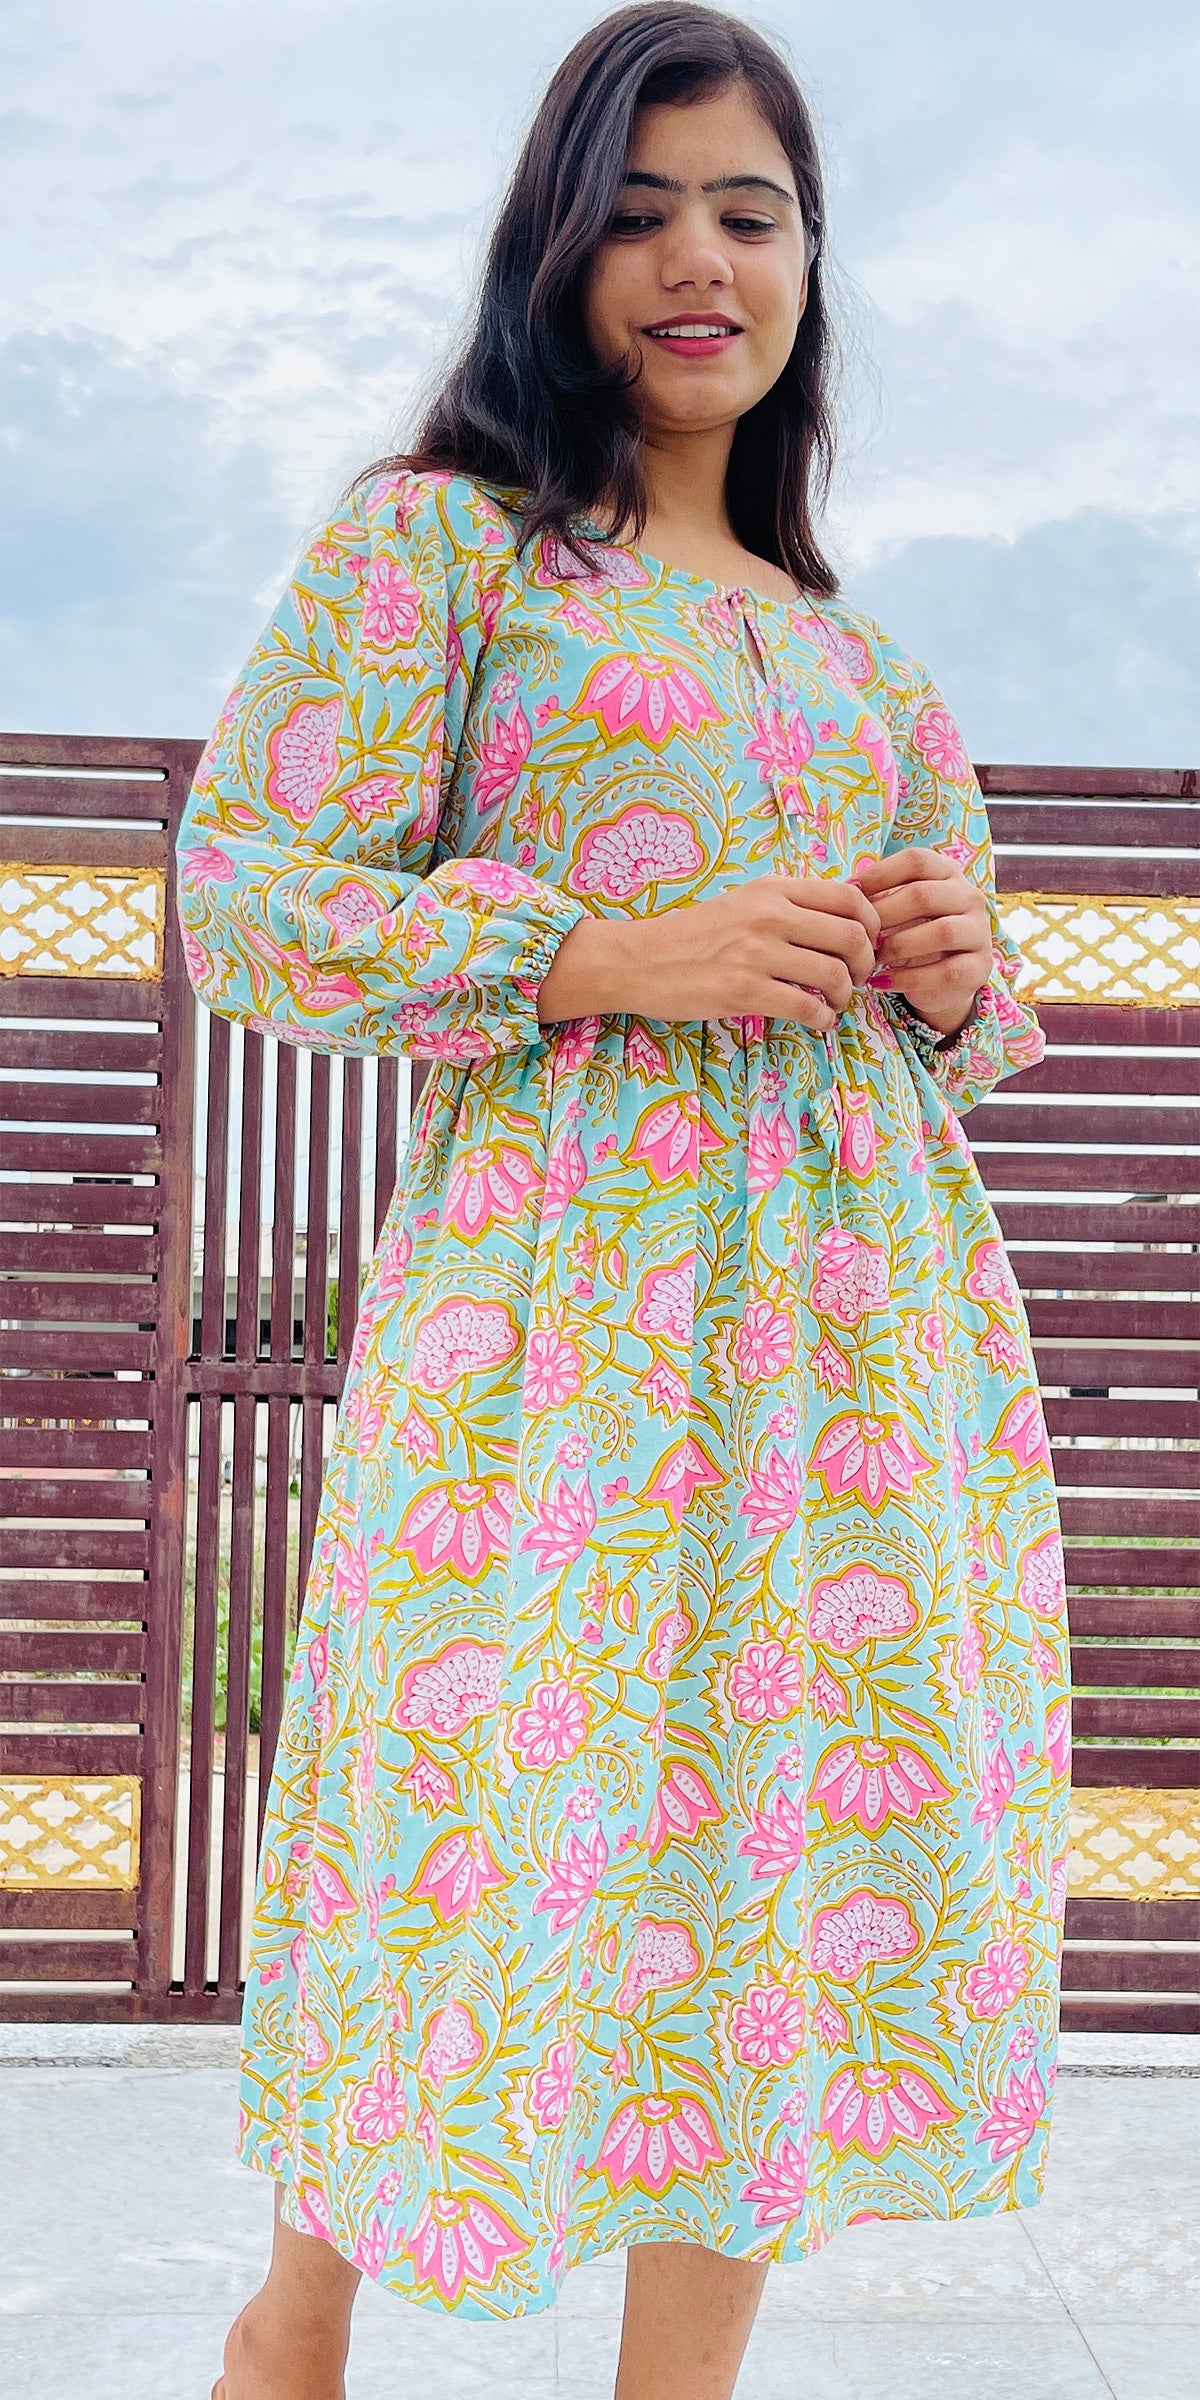 Floral Print Dress, Pink and Sea Green Dress, Full Sleeves, Pure Cotton